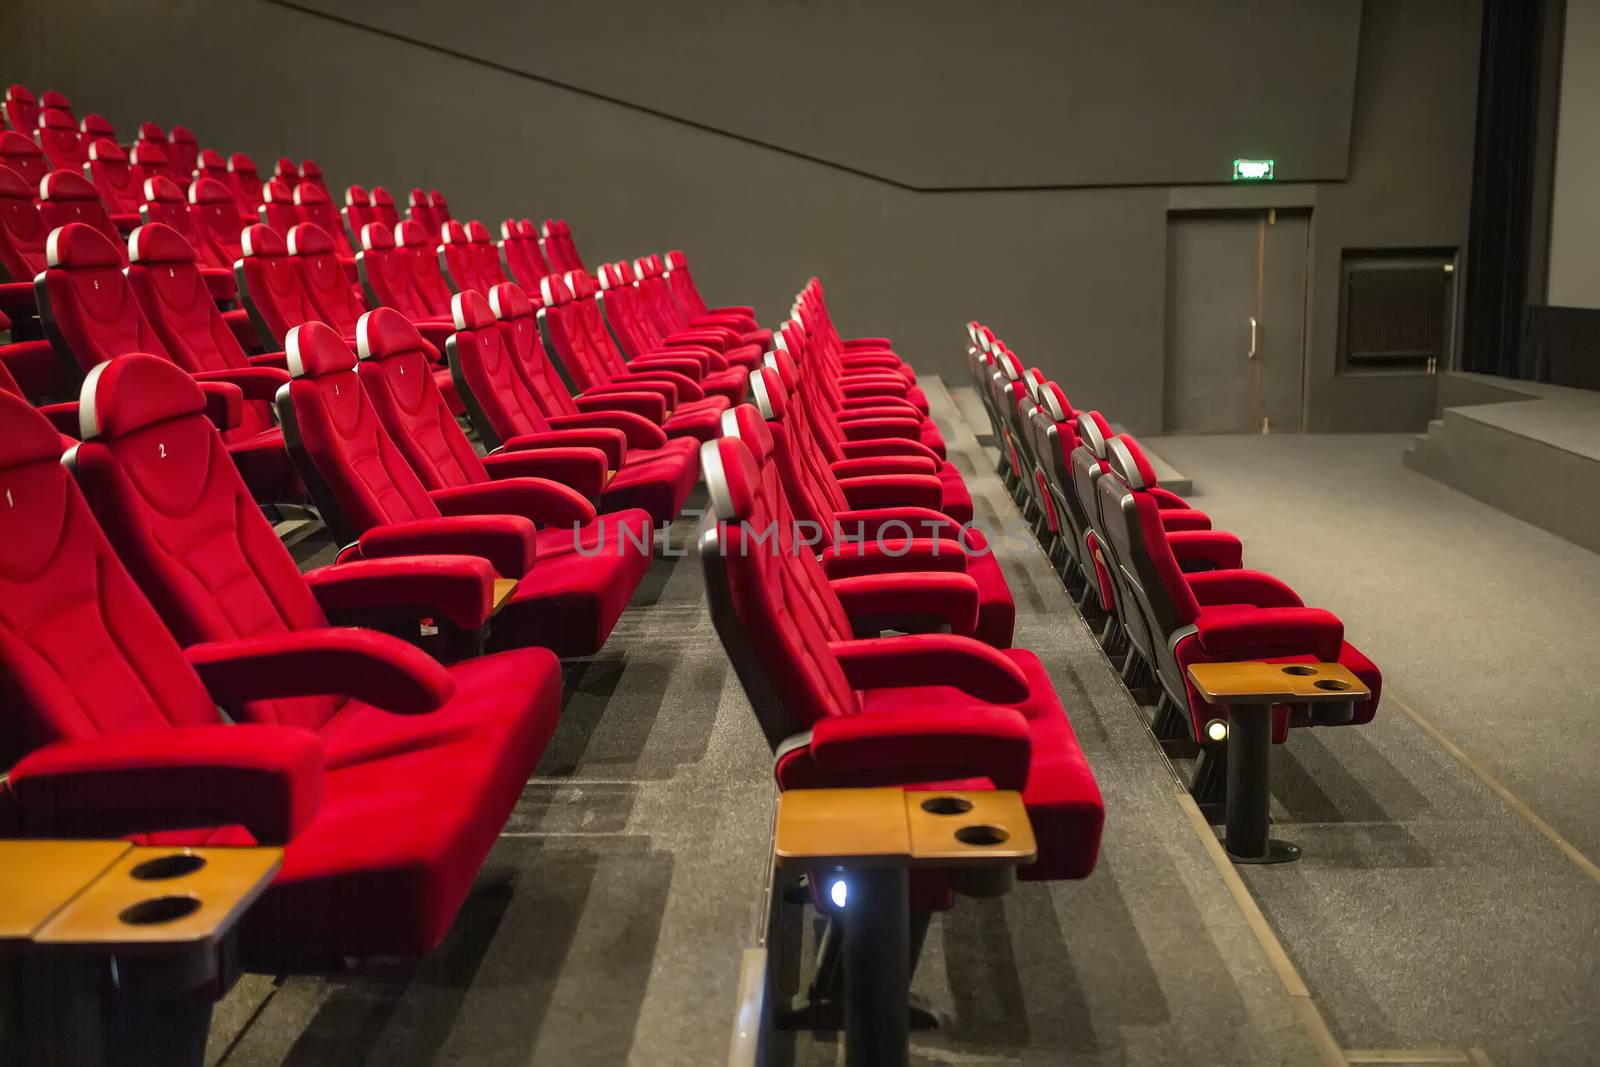 Empty cinema with red-black rows of seats 08.03.2019 Brovary, Ukraine by 977_ReX_977